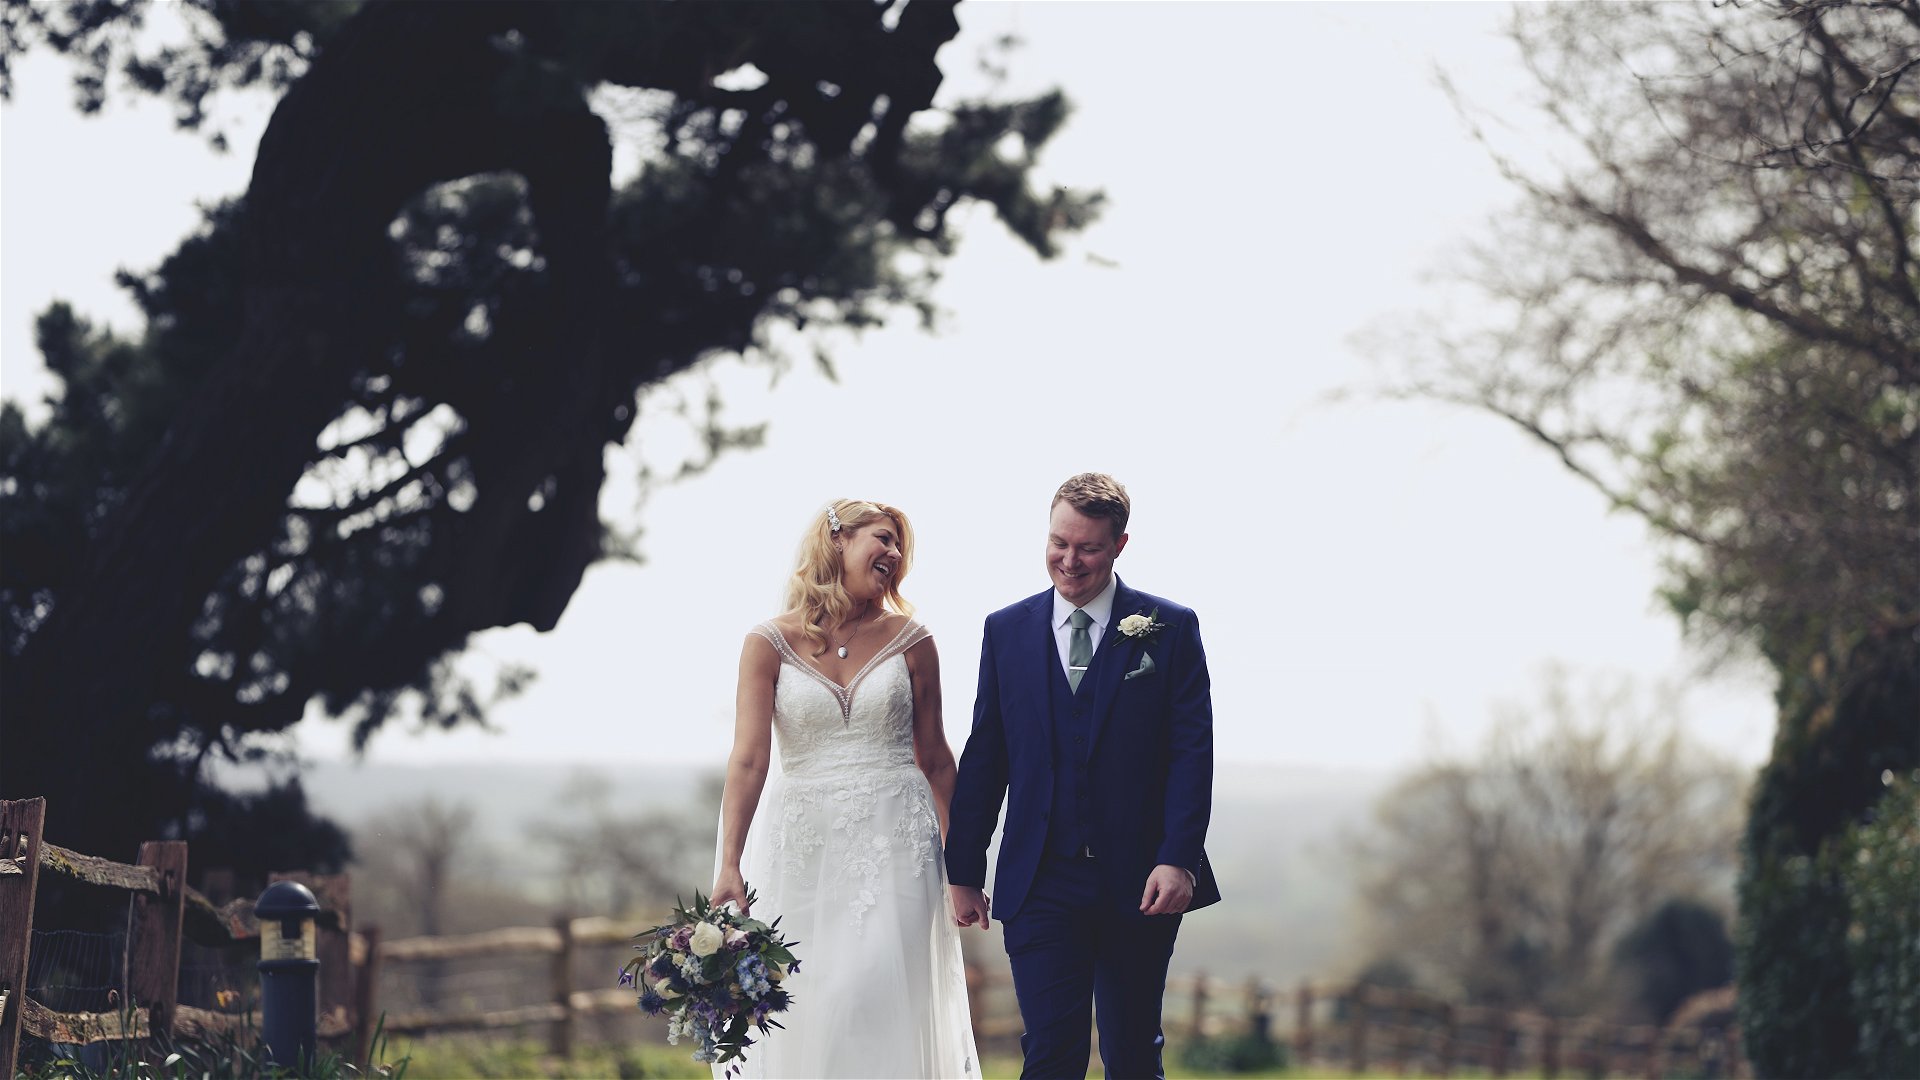 Sally + Chris / something special…